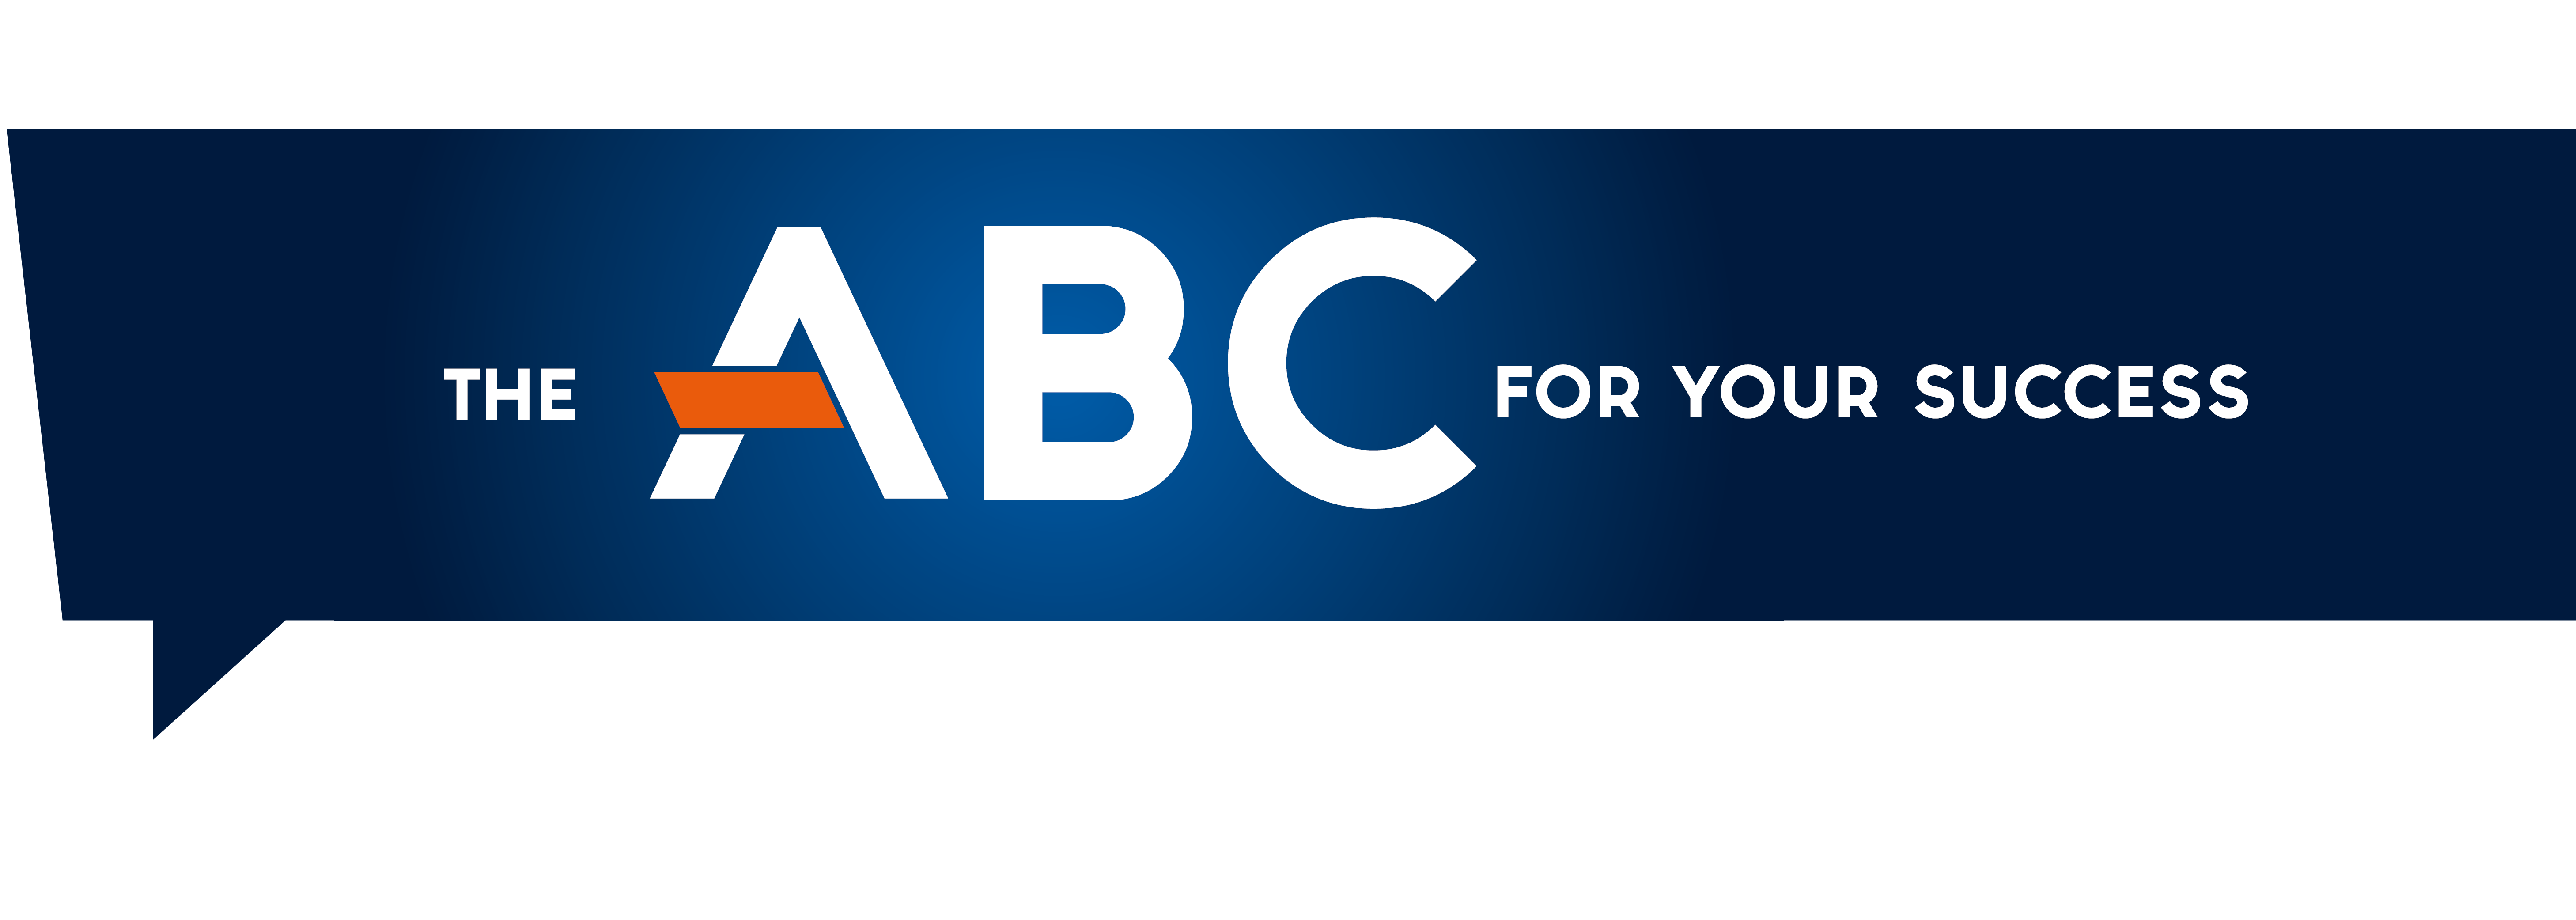 aciso-your-abc-for-more-success